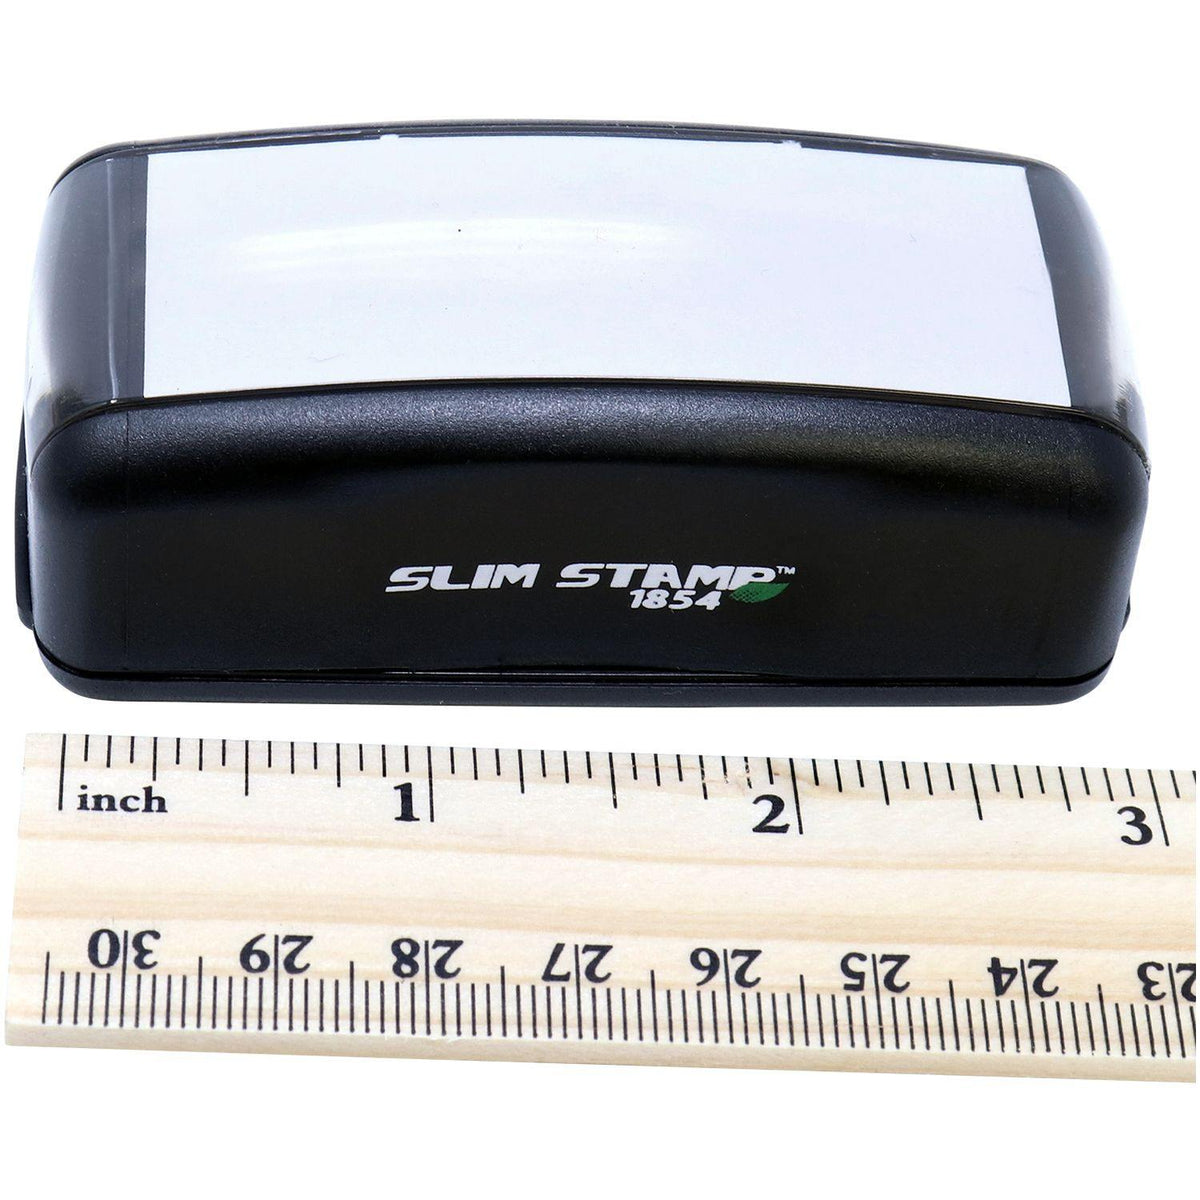 Measurement Large Pre-Inked Italic Personal Confidential Stamp with Ruler